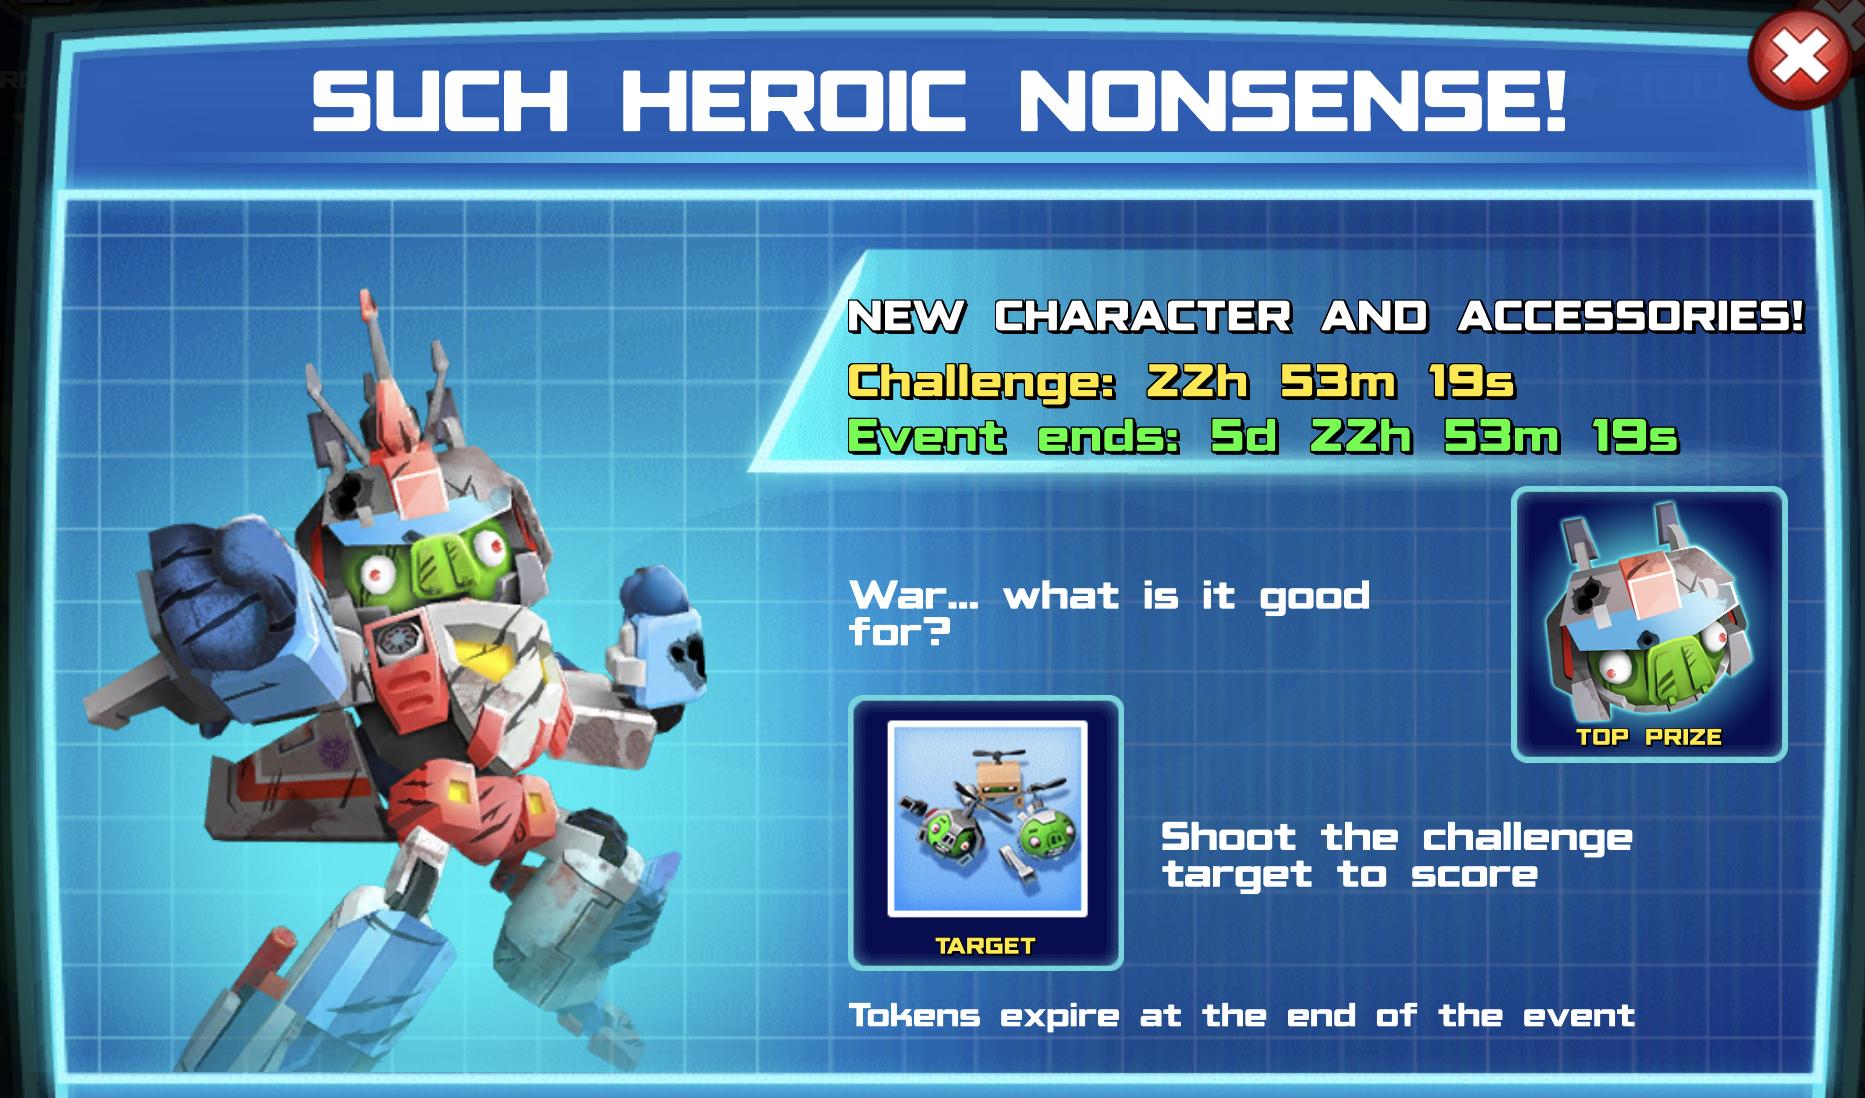 The event banner for Such heroic nonsense!